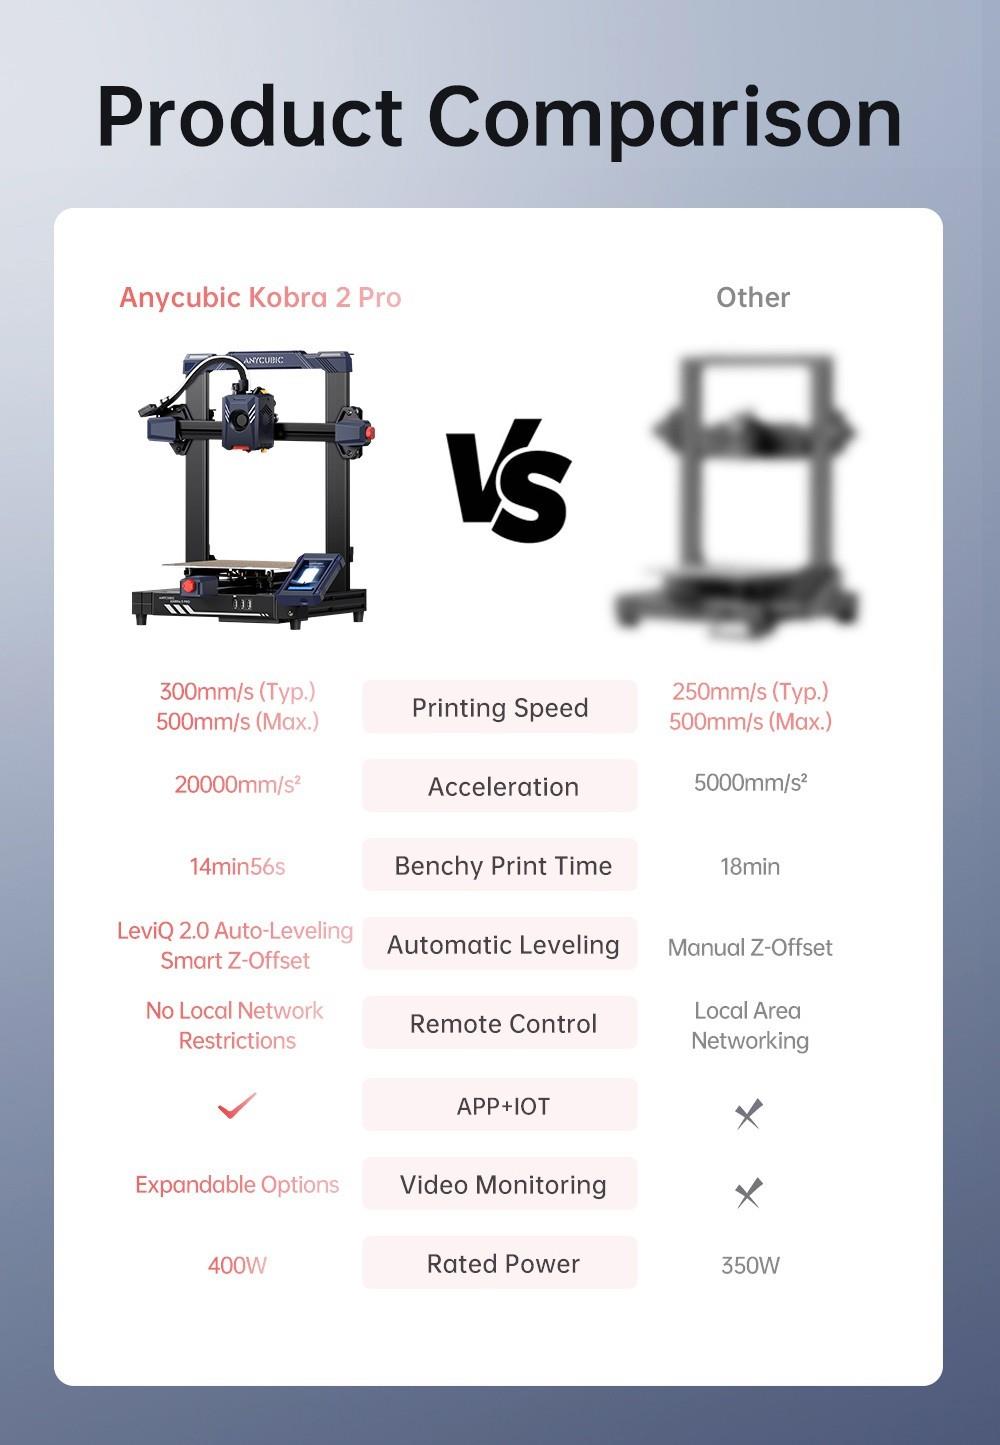 Anycubic Kobra 2 Pro 3D Printer, 25-Point Auto Leveling, 500mm/s Max Printing Speed, 250x220x220mm